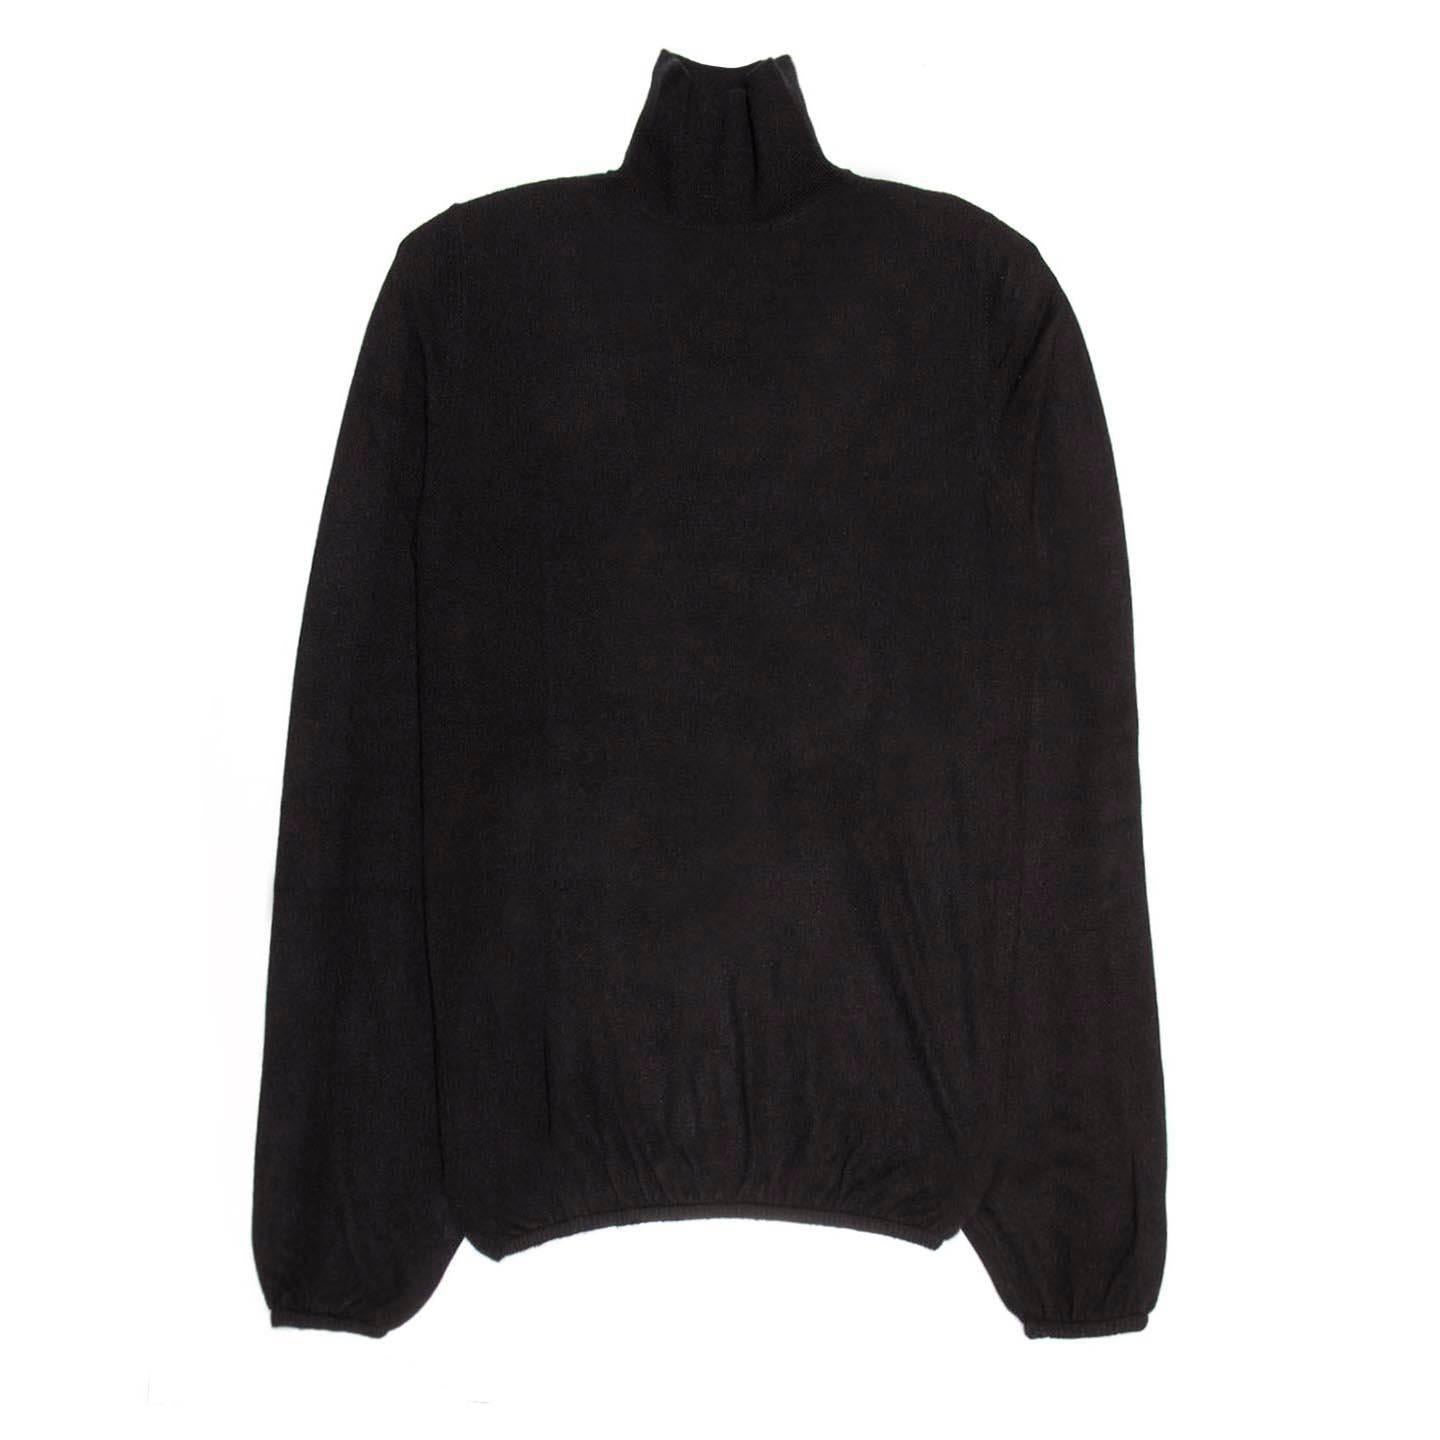 Louis Vuitton Black Cashmere Sweater In Excellent Condition For Sale In Brooklyn, NY